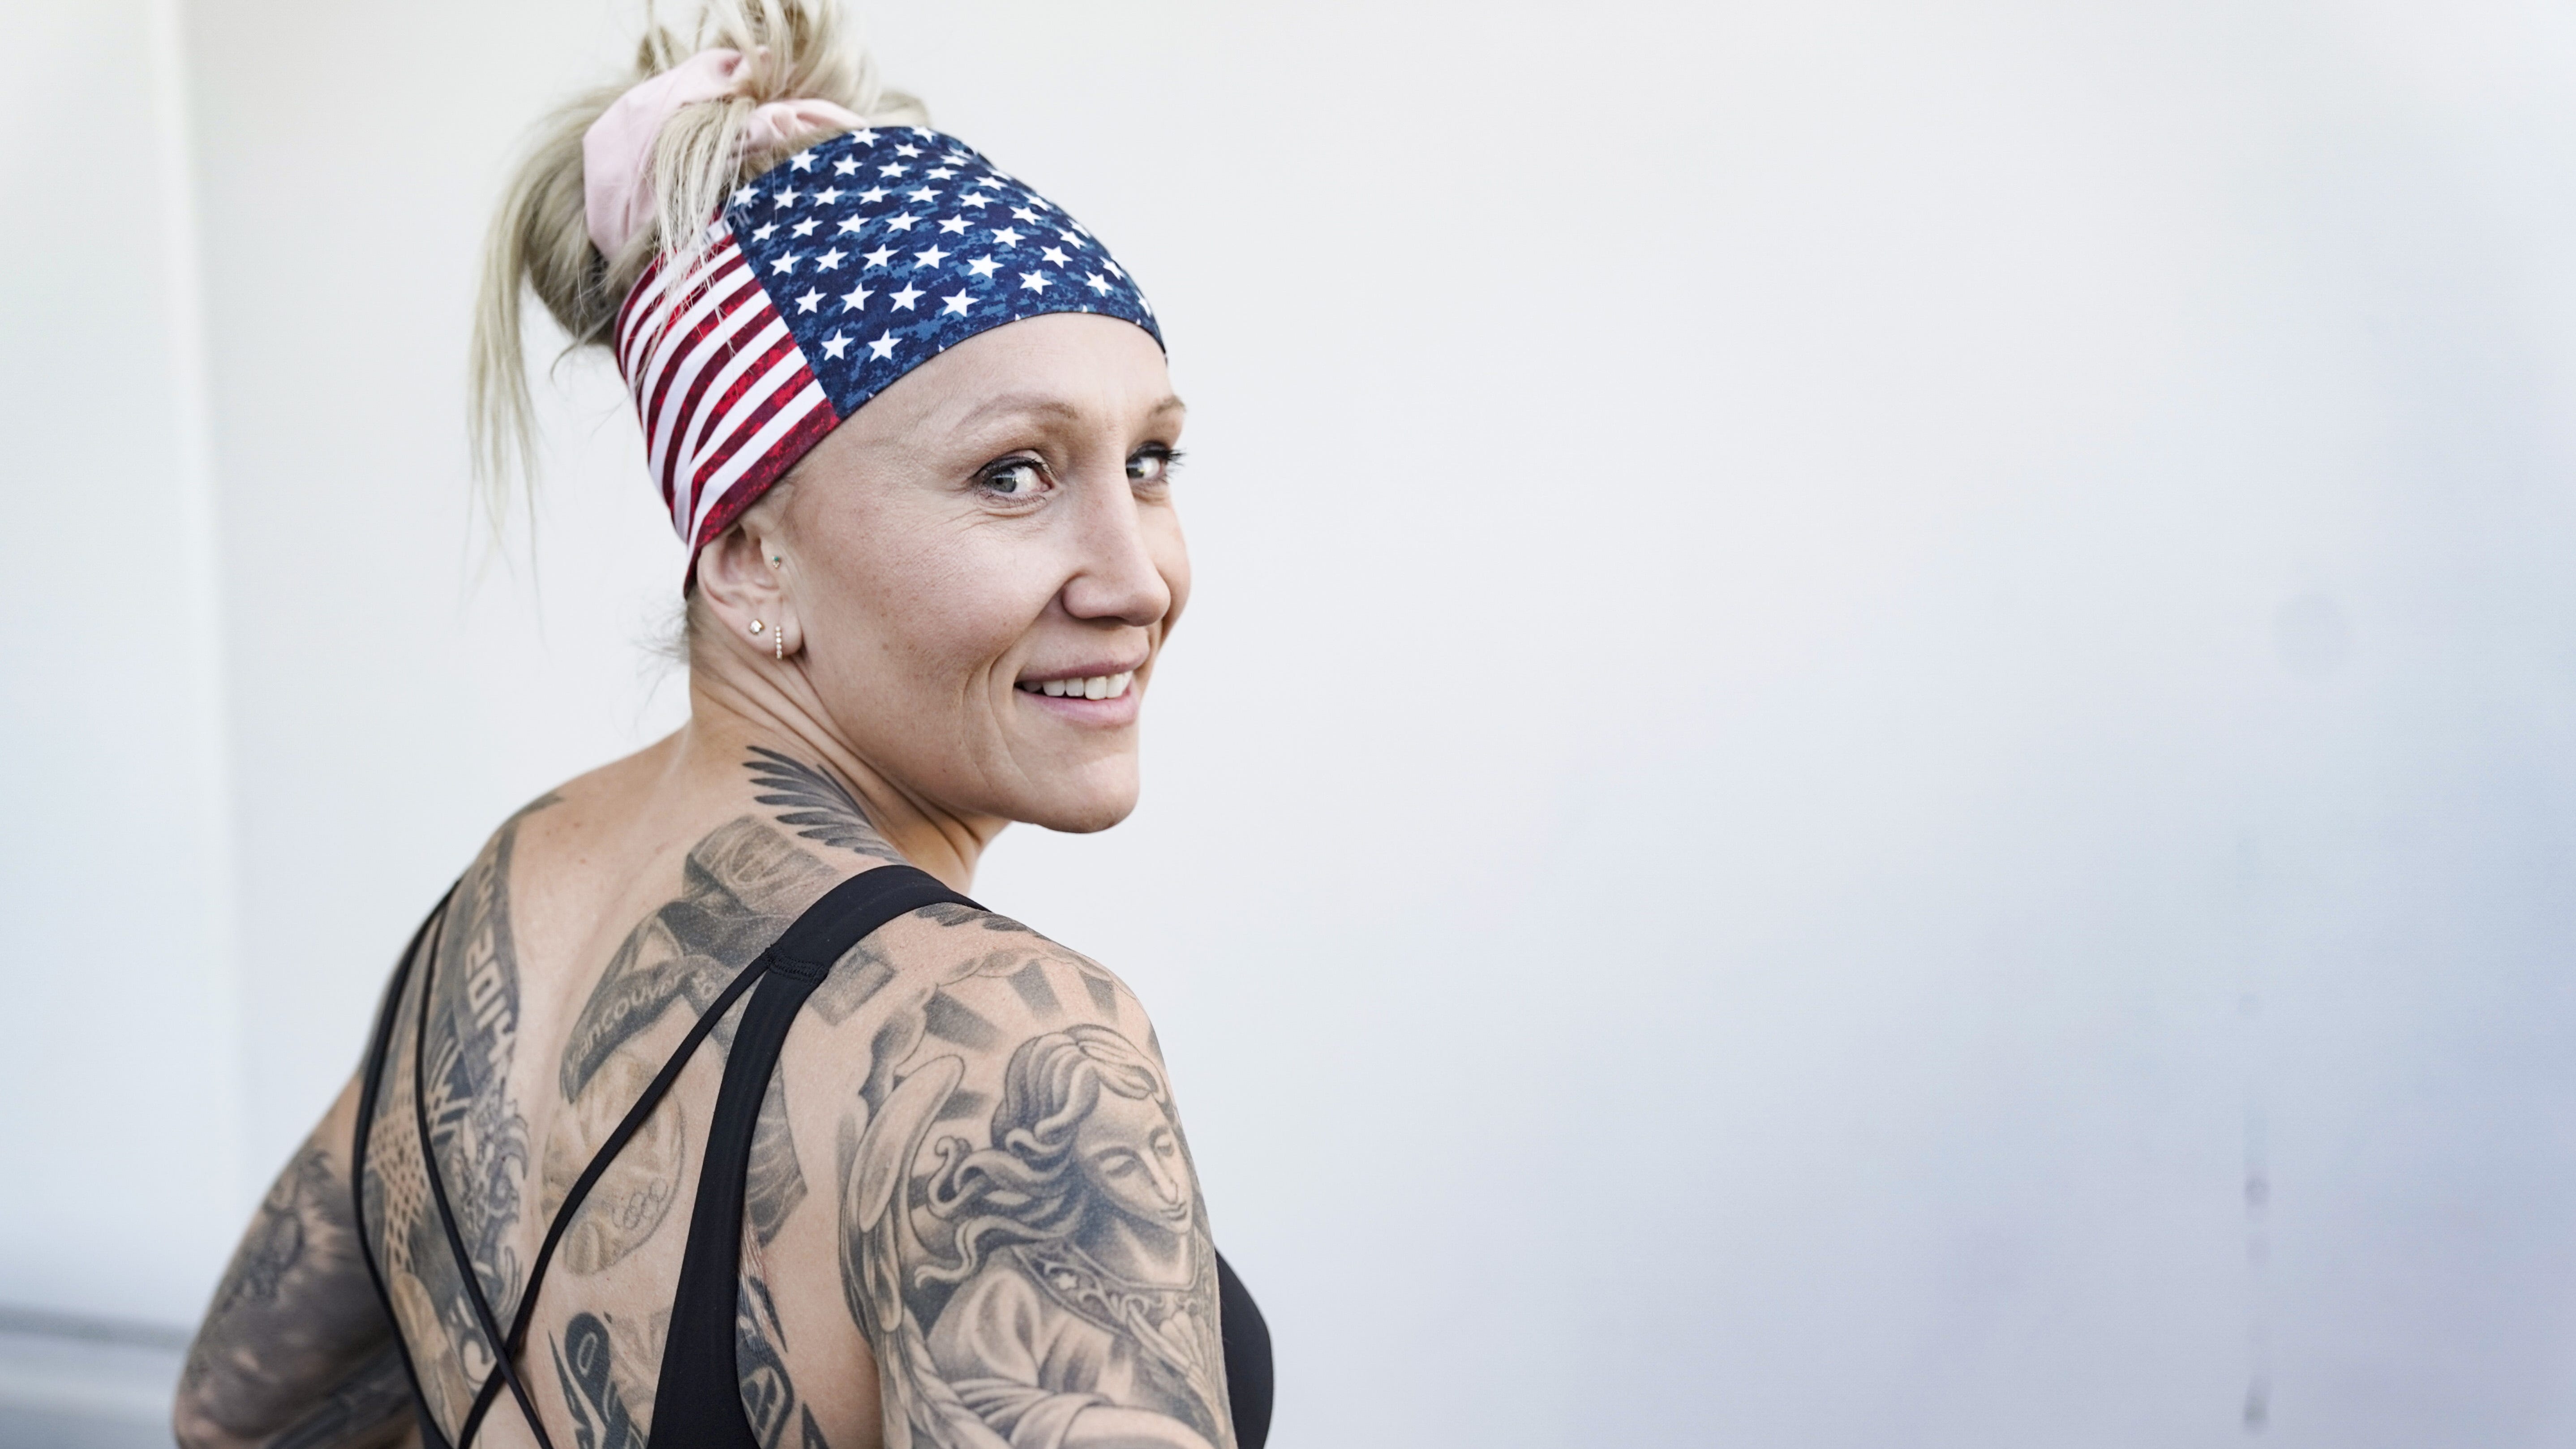 Opinion: Bobsled gold medalist Kaillie Humphries is driven by her newest title: American